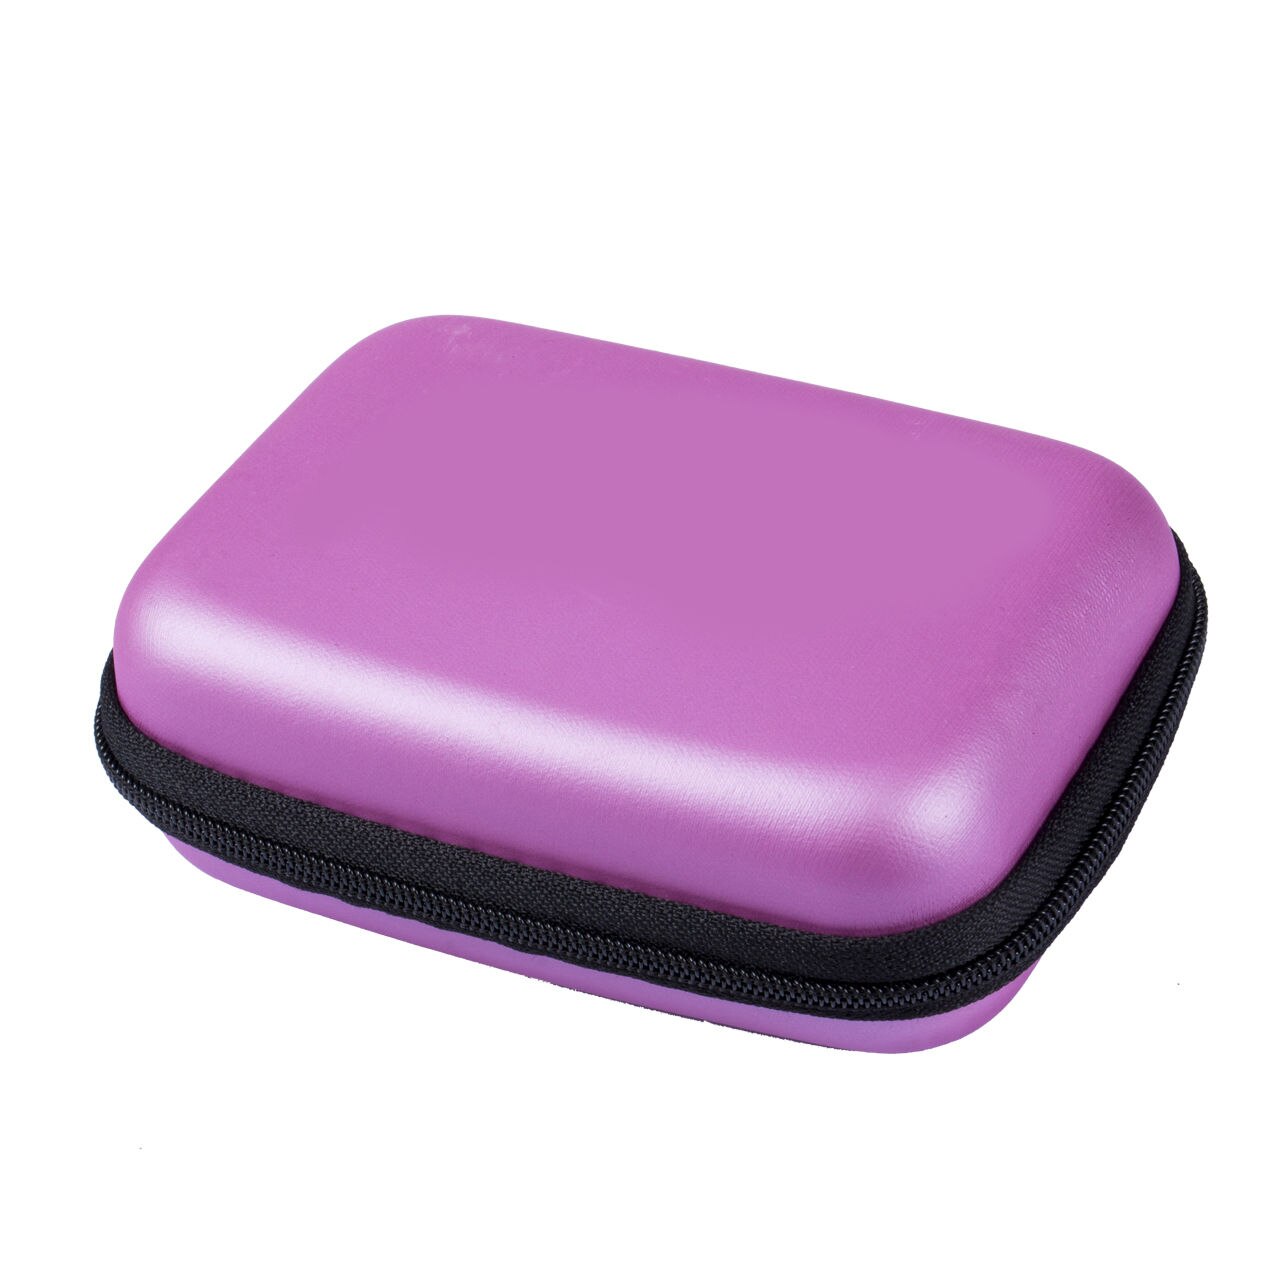 Travel Digital USB Storage Portable Travel Headset Earphone Earbud Cable Storage Pouch Bag Hard Case Box: Pink